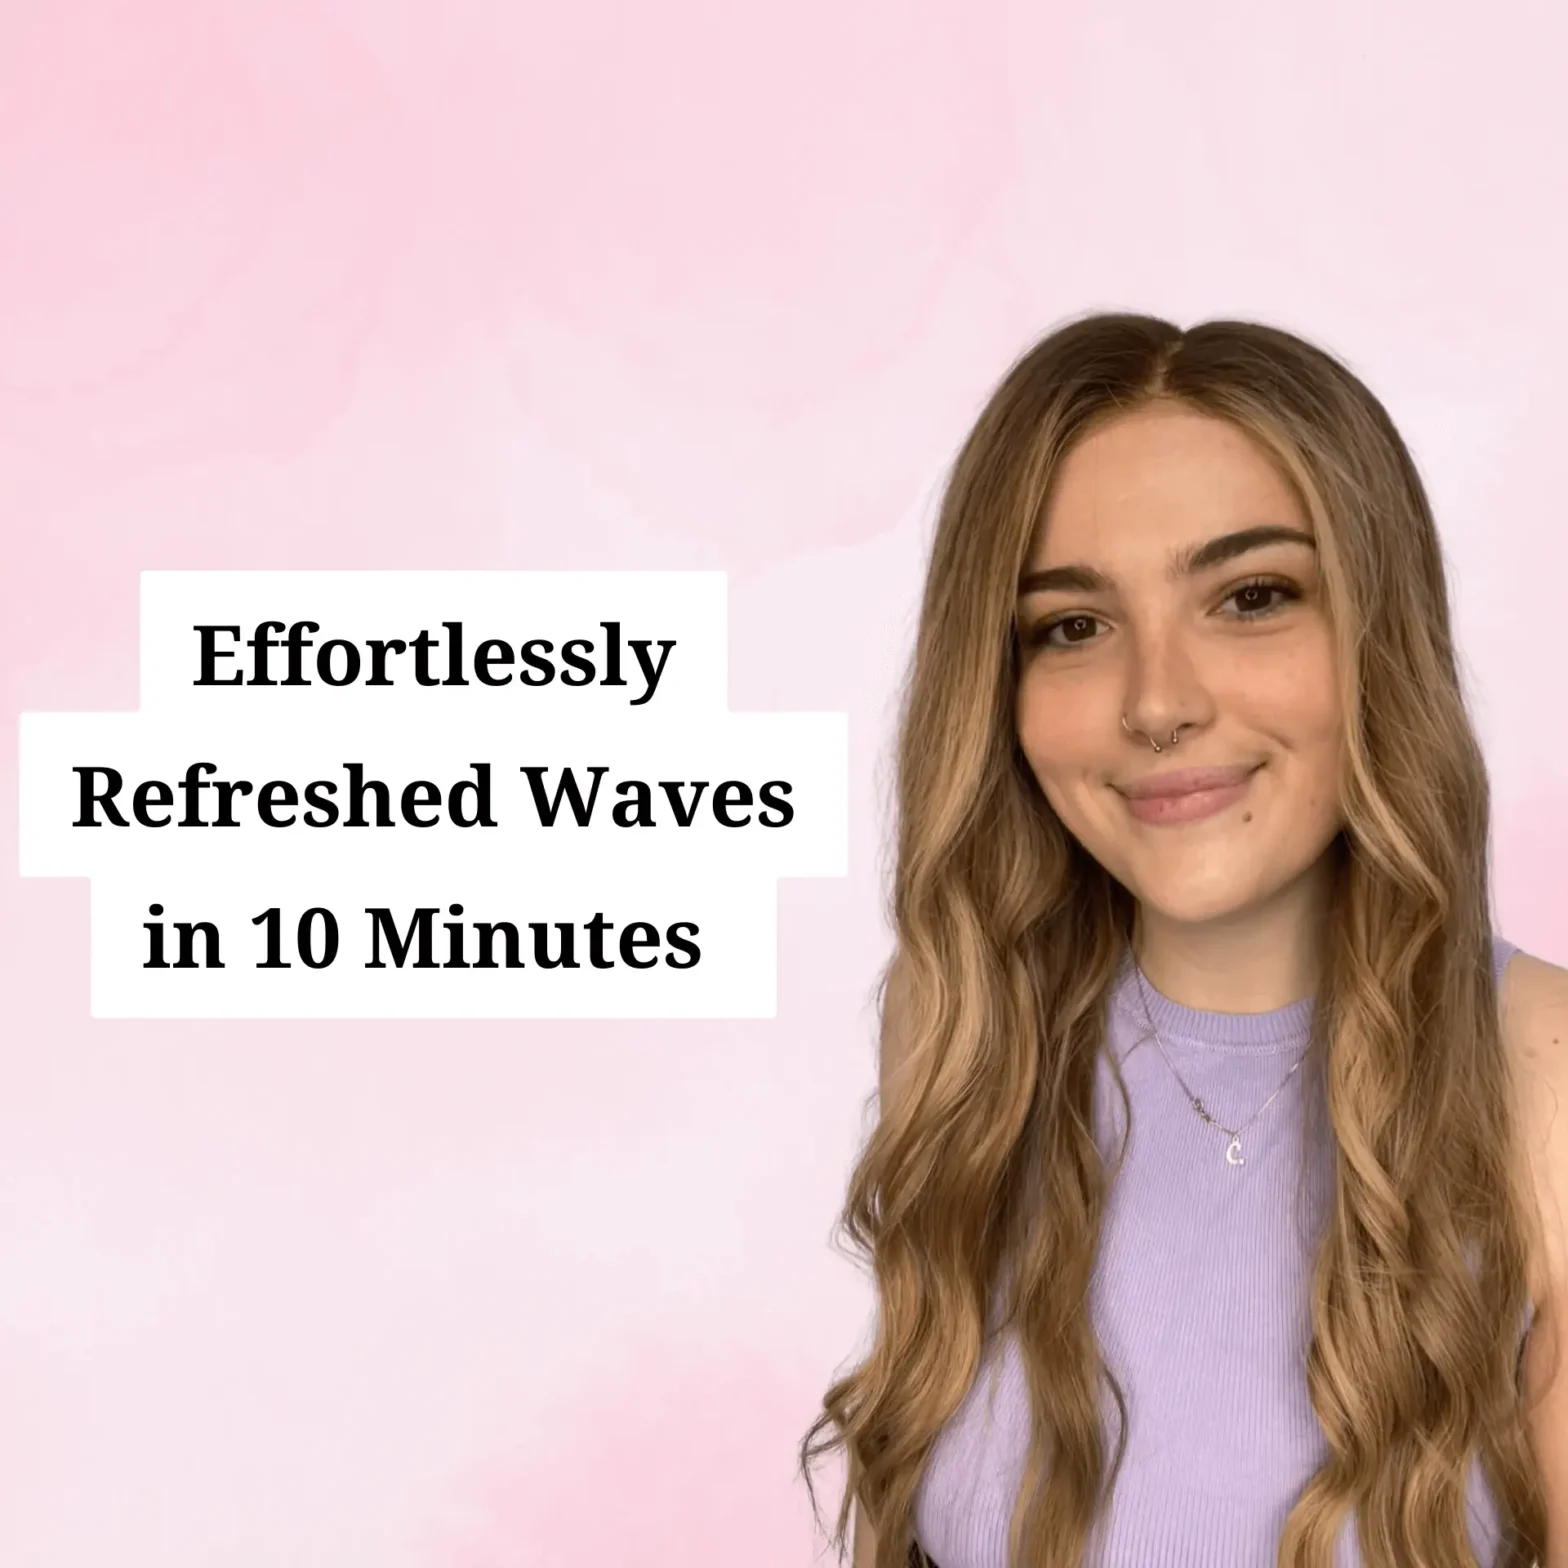 Lace Fronts Australia Blog - Effortlessly Refreshed Waves in 10 Minutes